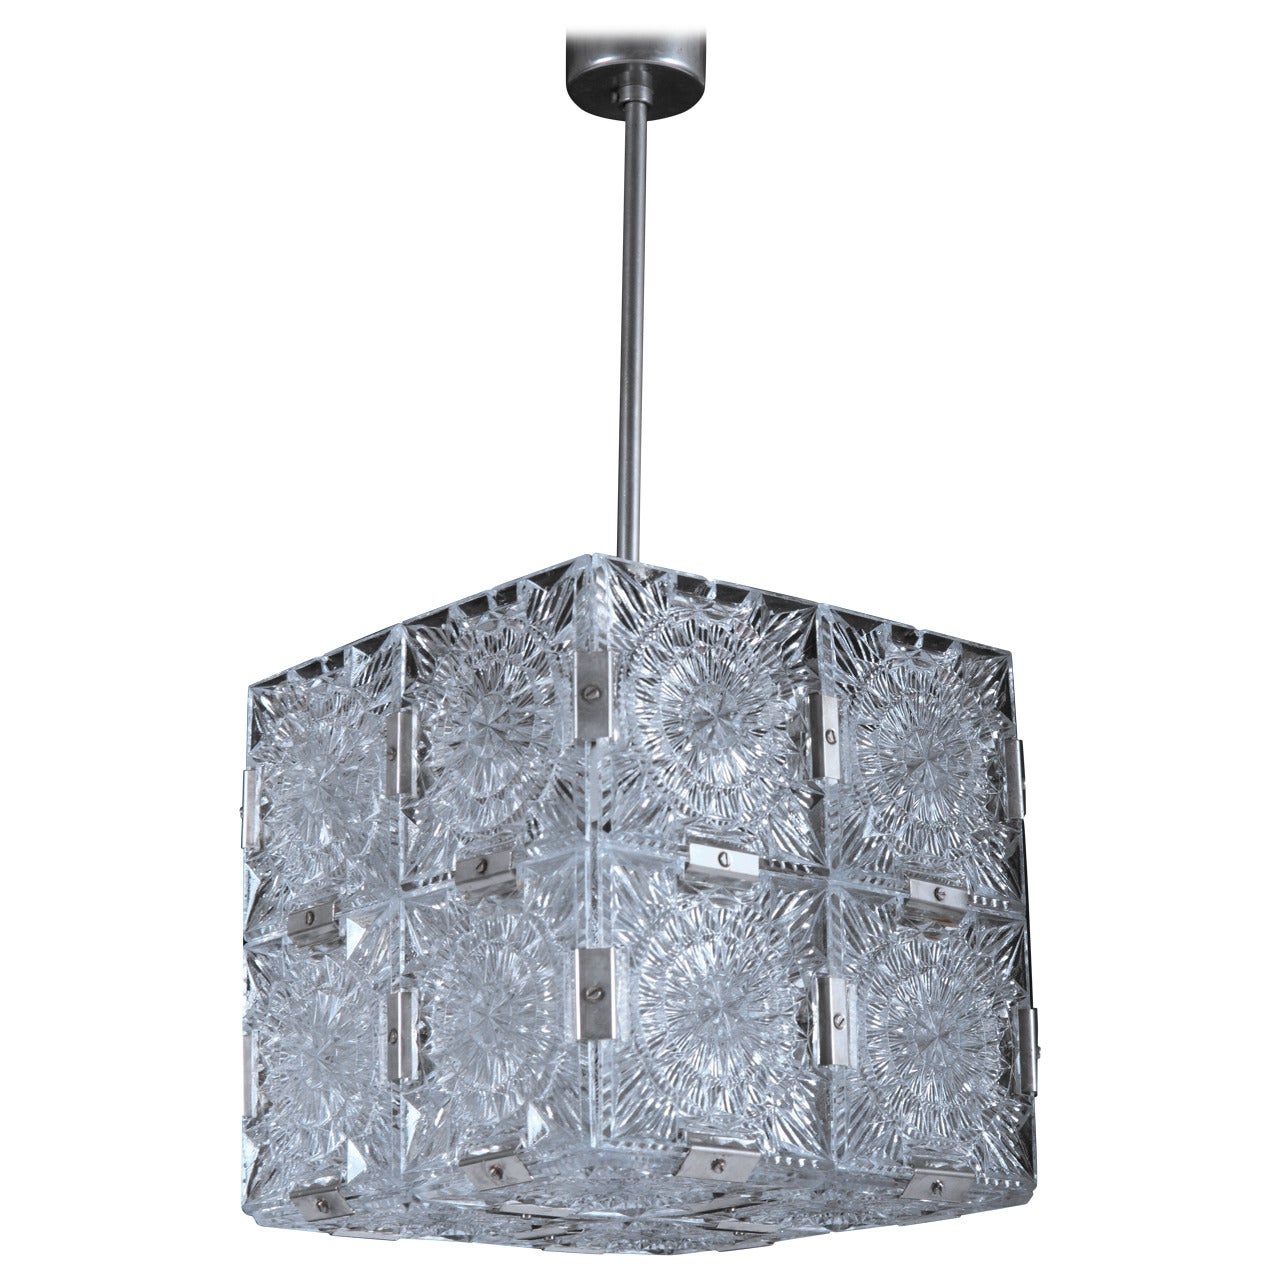 Mid-Century Cube Form Pendant Ceiling Fixture Featuring Etched Glass by Kalmar For Sale